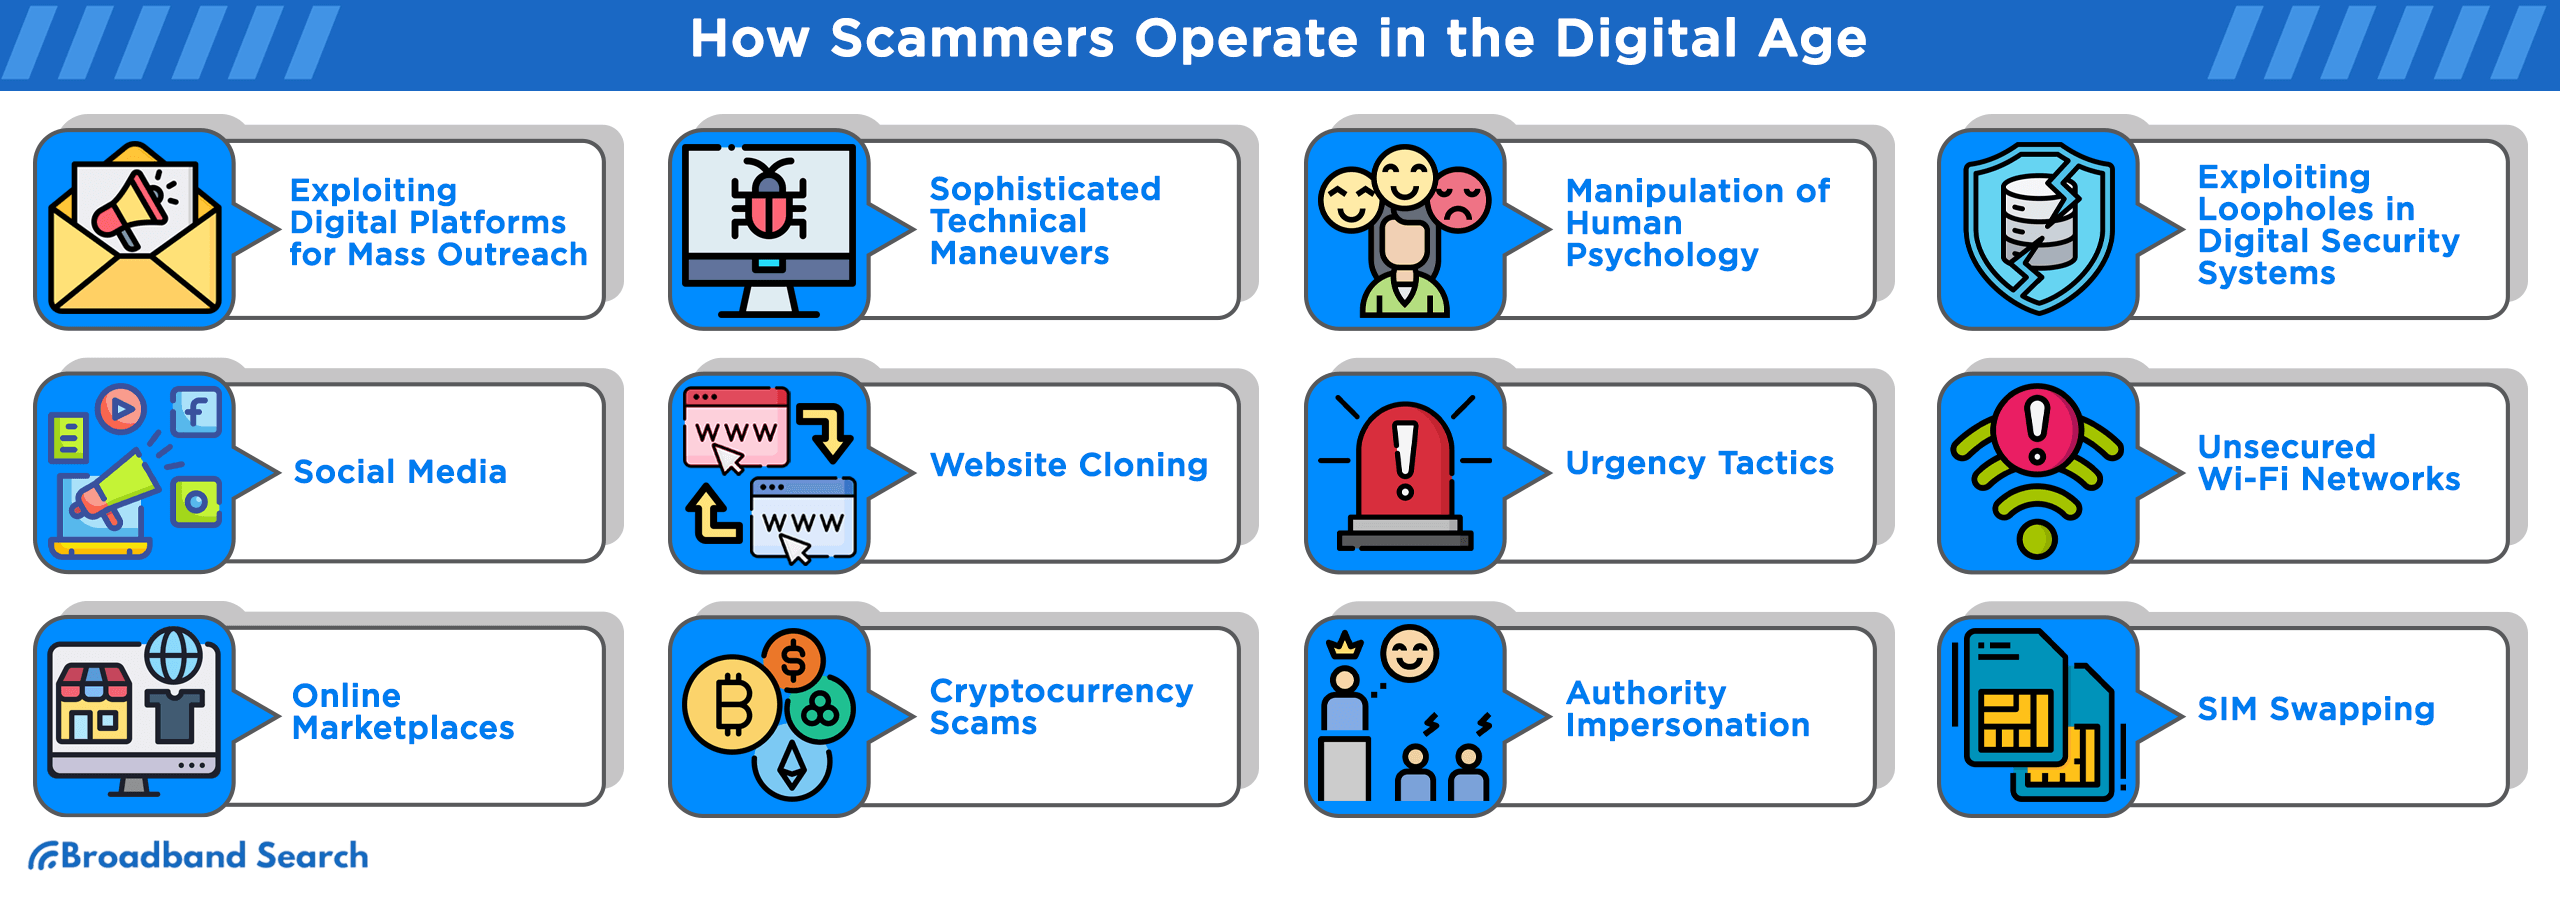 How scammers operate in the digital age